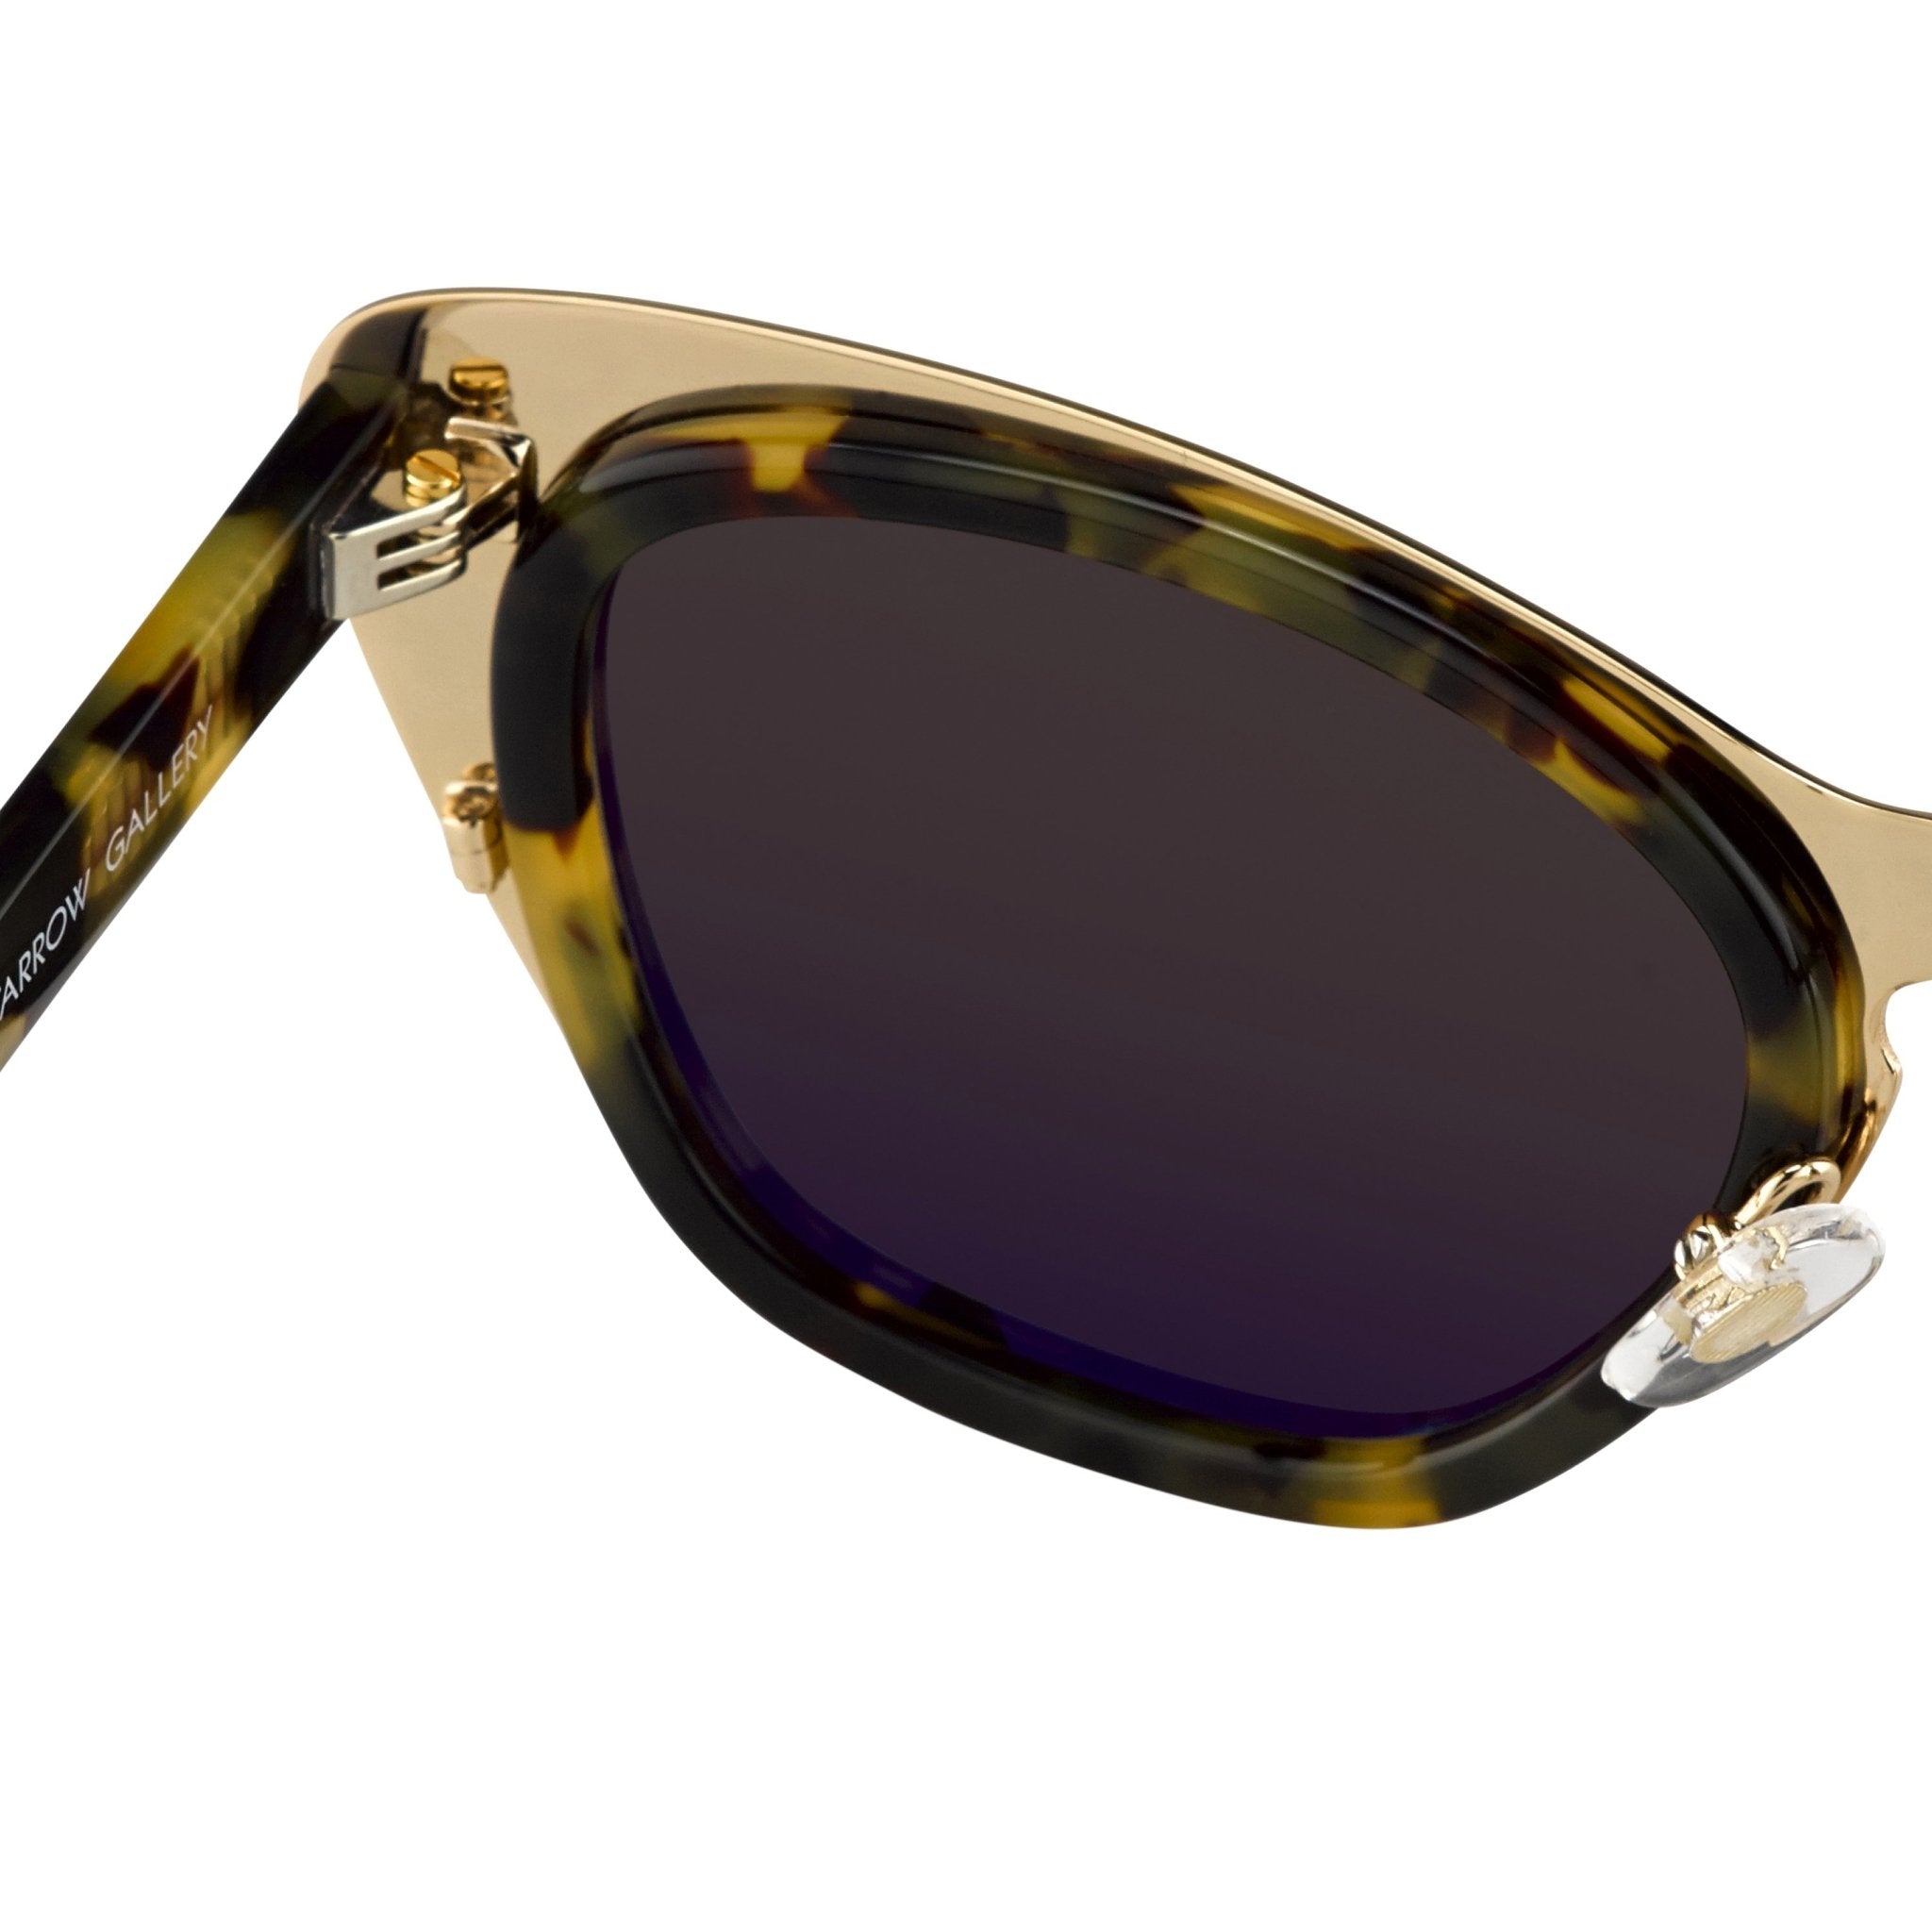 Erdem Women Sunglasses Cat Eye Tortoise Shell Gold with Grey Lenses Category 3 EDM17C2SUN - Watches & Crystals